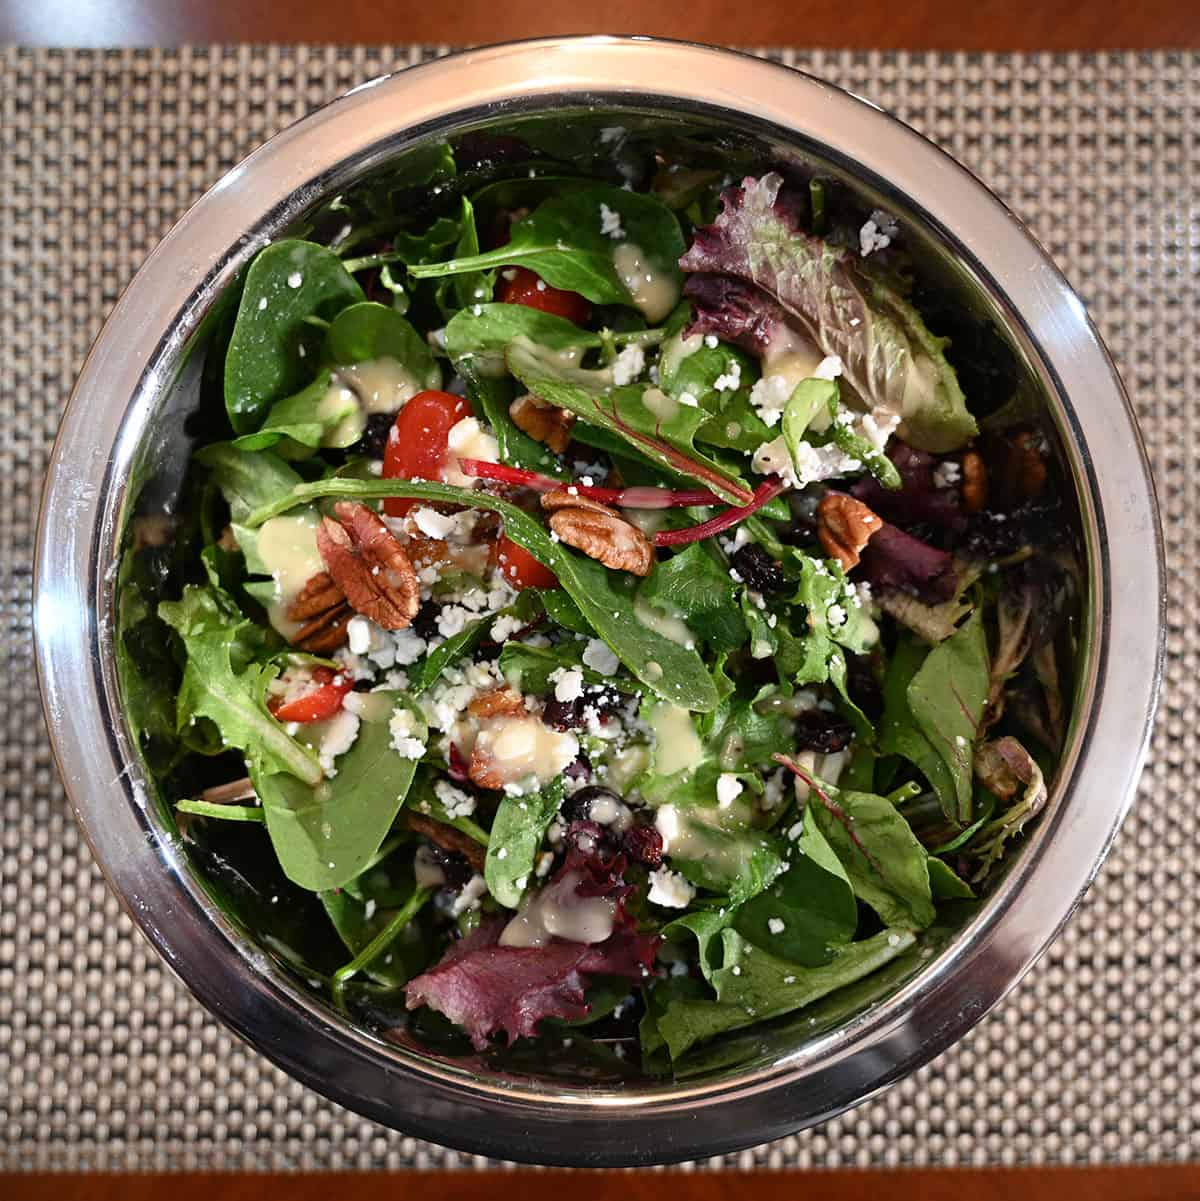 Top down image of the salad prepared in a metal bowl.